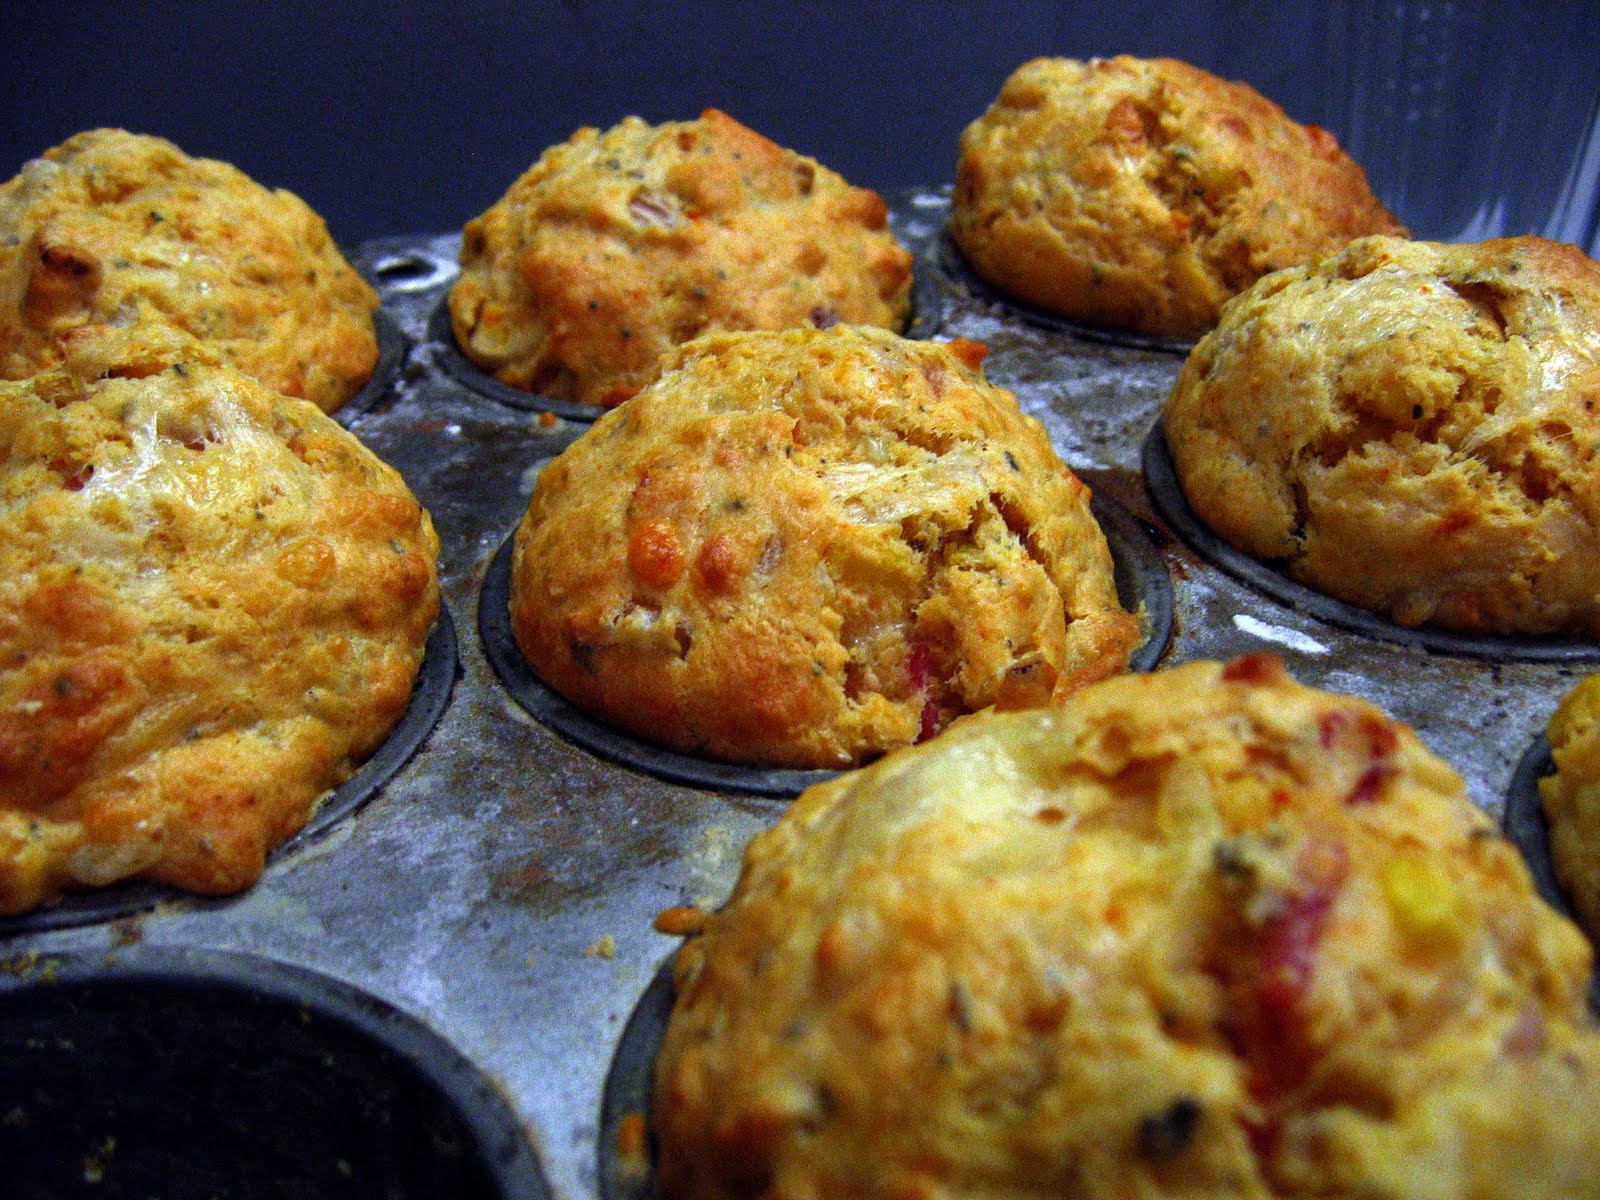 good food in a crap kitchen: Snow, muffins and toddy